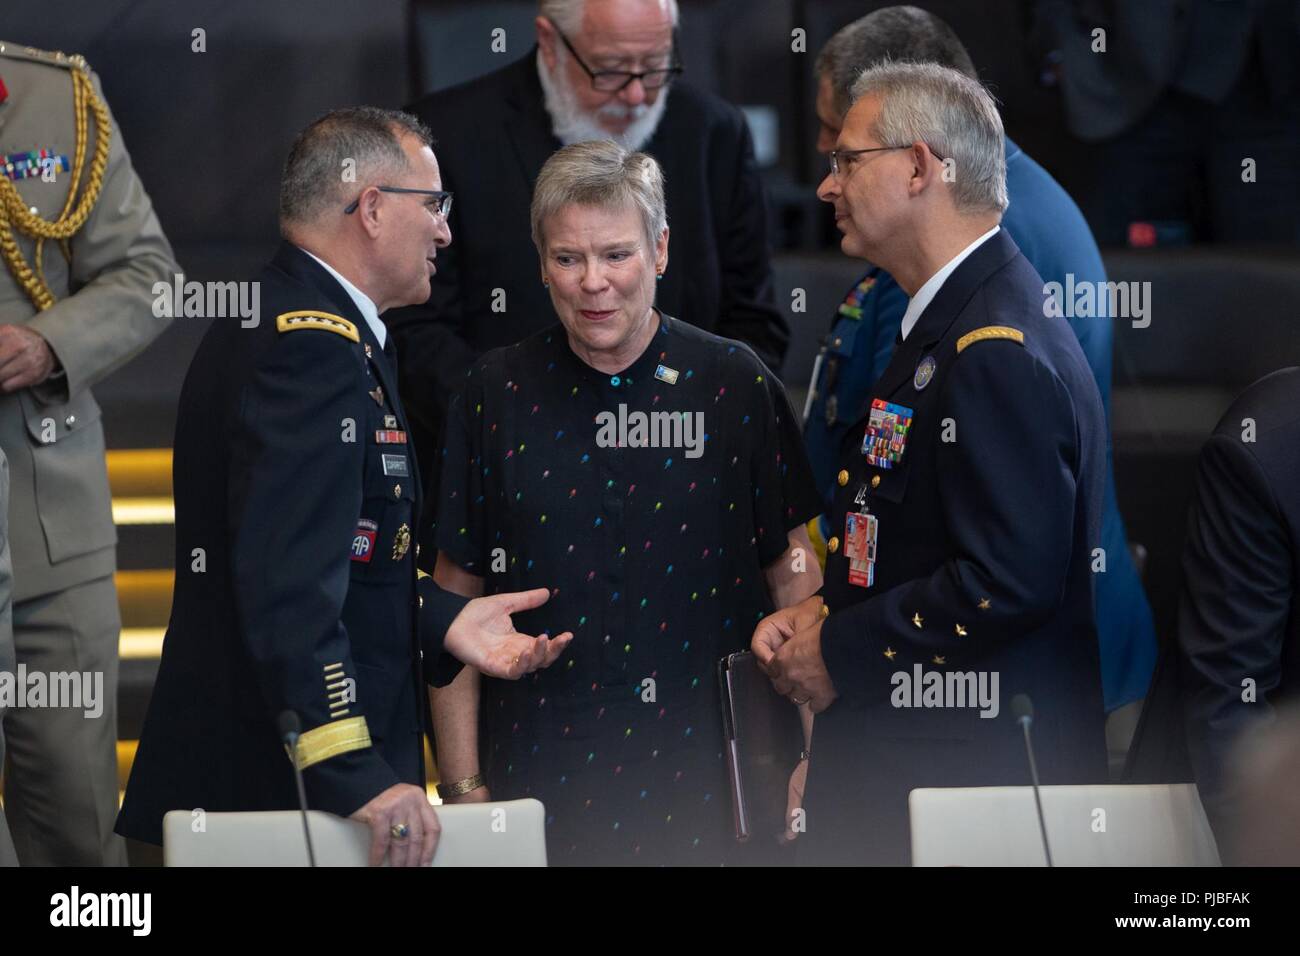 General Curtis M. Scaparrotti, Supreme Allied Commander Europe, and General Denis Mercier, Supreme Allied Commander Transformation, speak with Rose Gottemoeller, deputy secretary general of NATO, during the Brussels Summit at NATO HQ, Brussels, Belgium, July 11, 2018. General Scaparrotti attended the Brussels Summit to provide military guidance to the Atlantic Council and to meet with military and political leadership from throughout the Alliance. (NATO Stock Photo